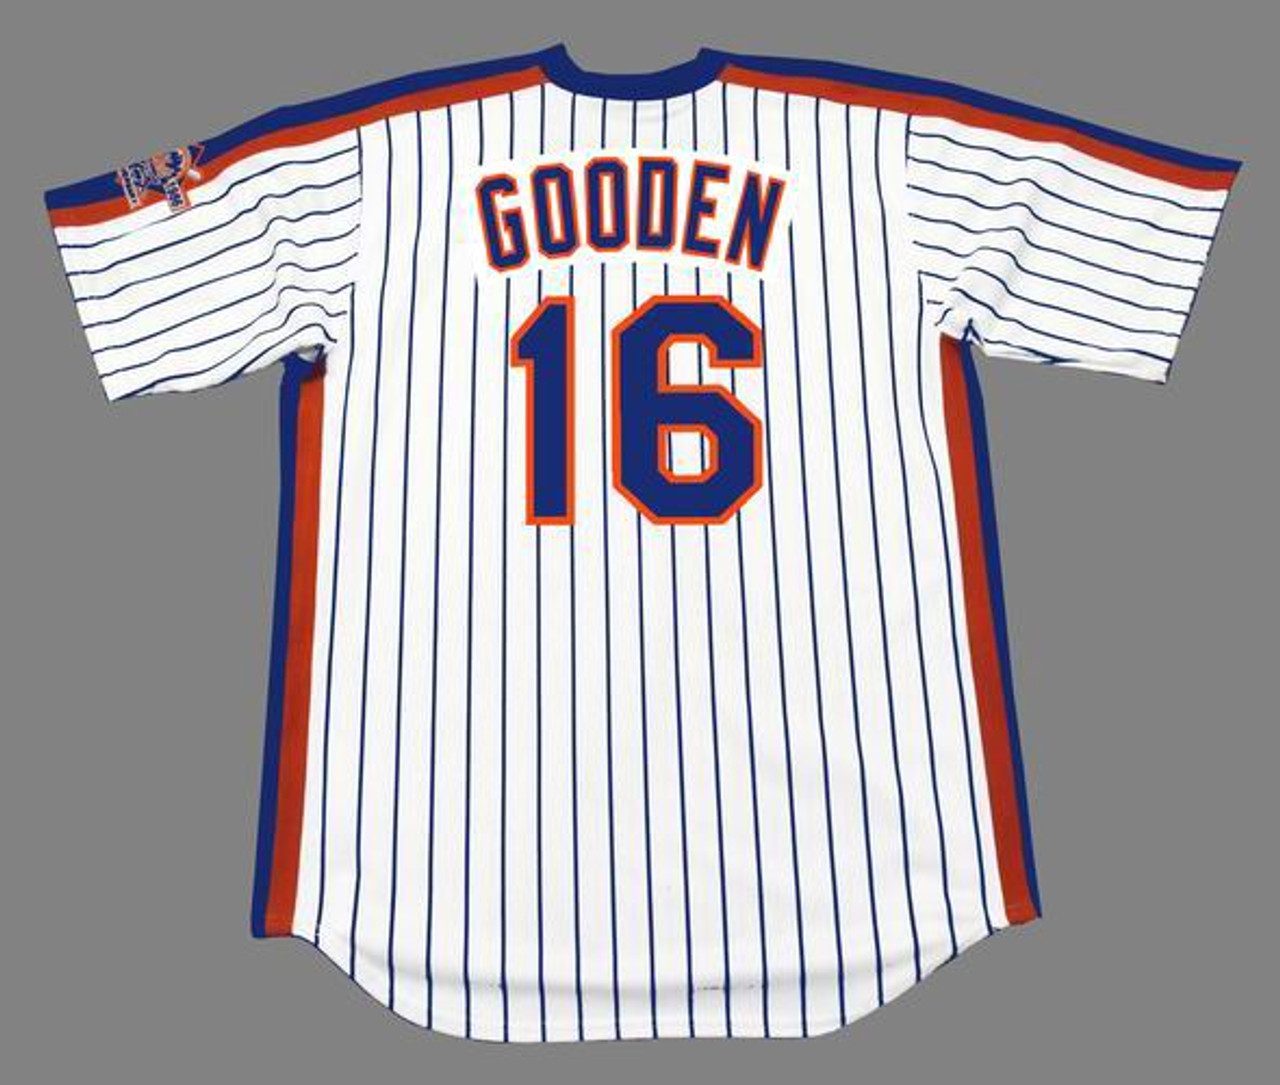 Dwight Gooden 1986 New York Mets Cooperstown Home Throwback MLB Jersey